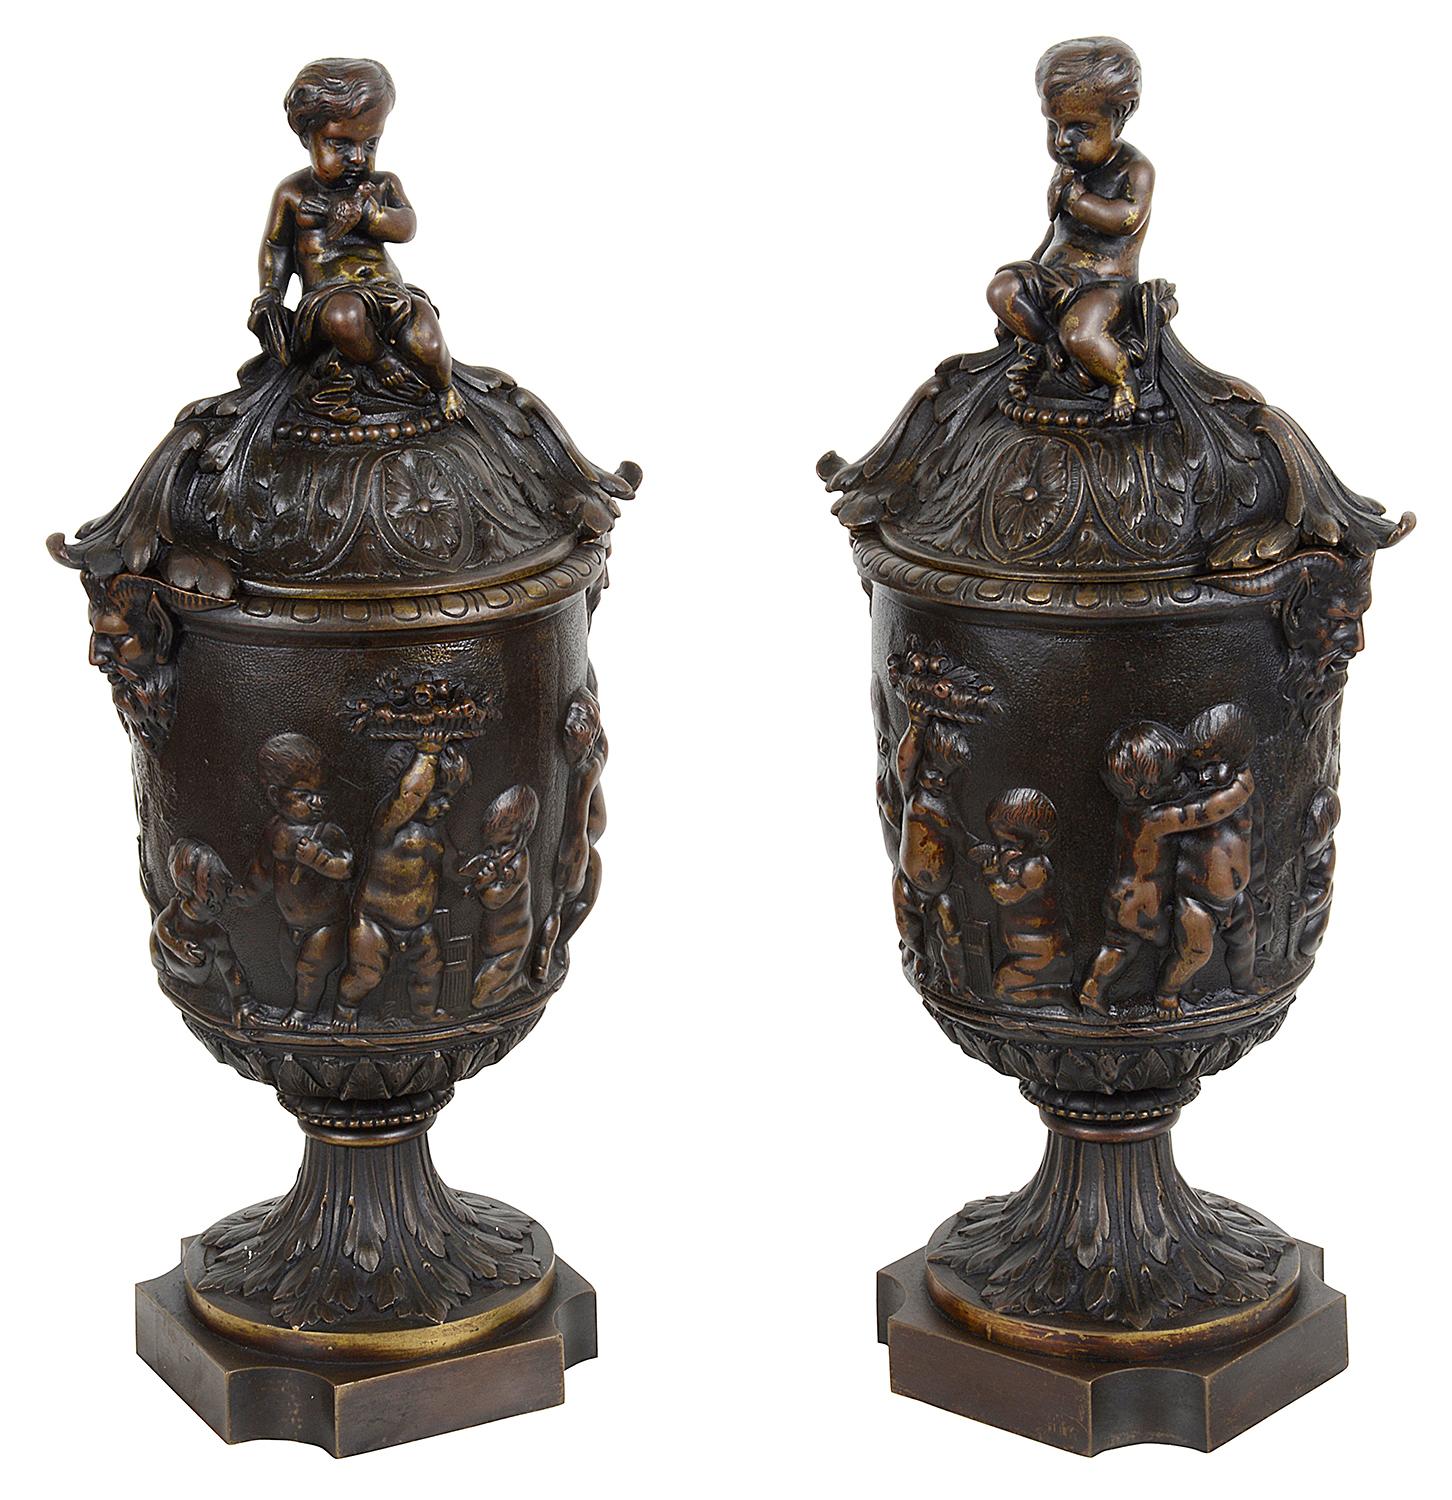 A good quality pair of French 19th century classical lidded bronze urns each with seated putti atop scrolling foliate decoration. Scenes of Bacchus influenced cherubs playing above pedestal bases.